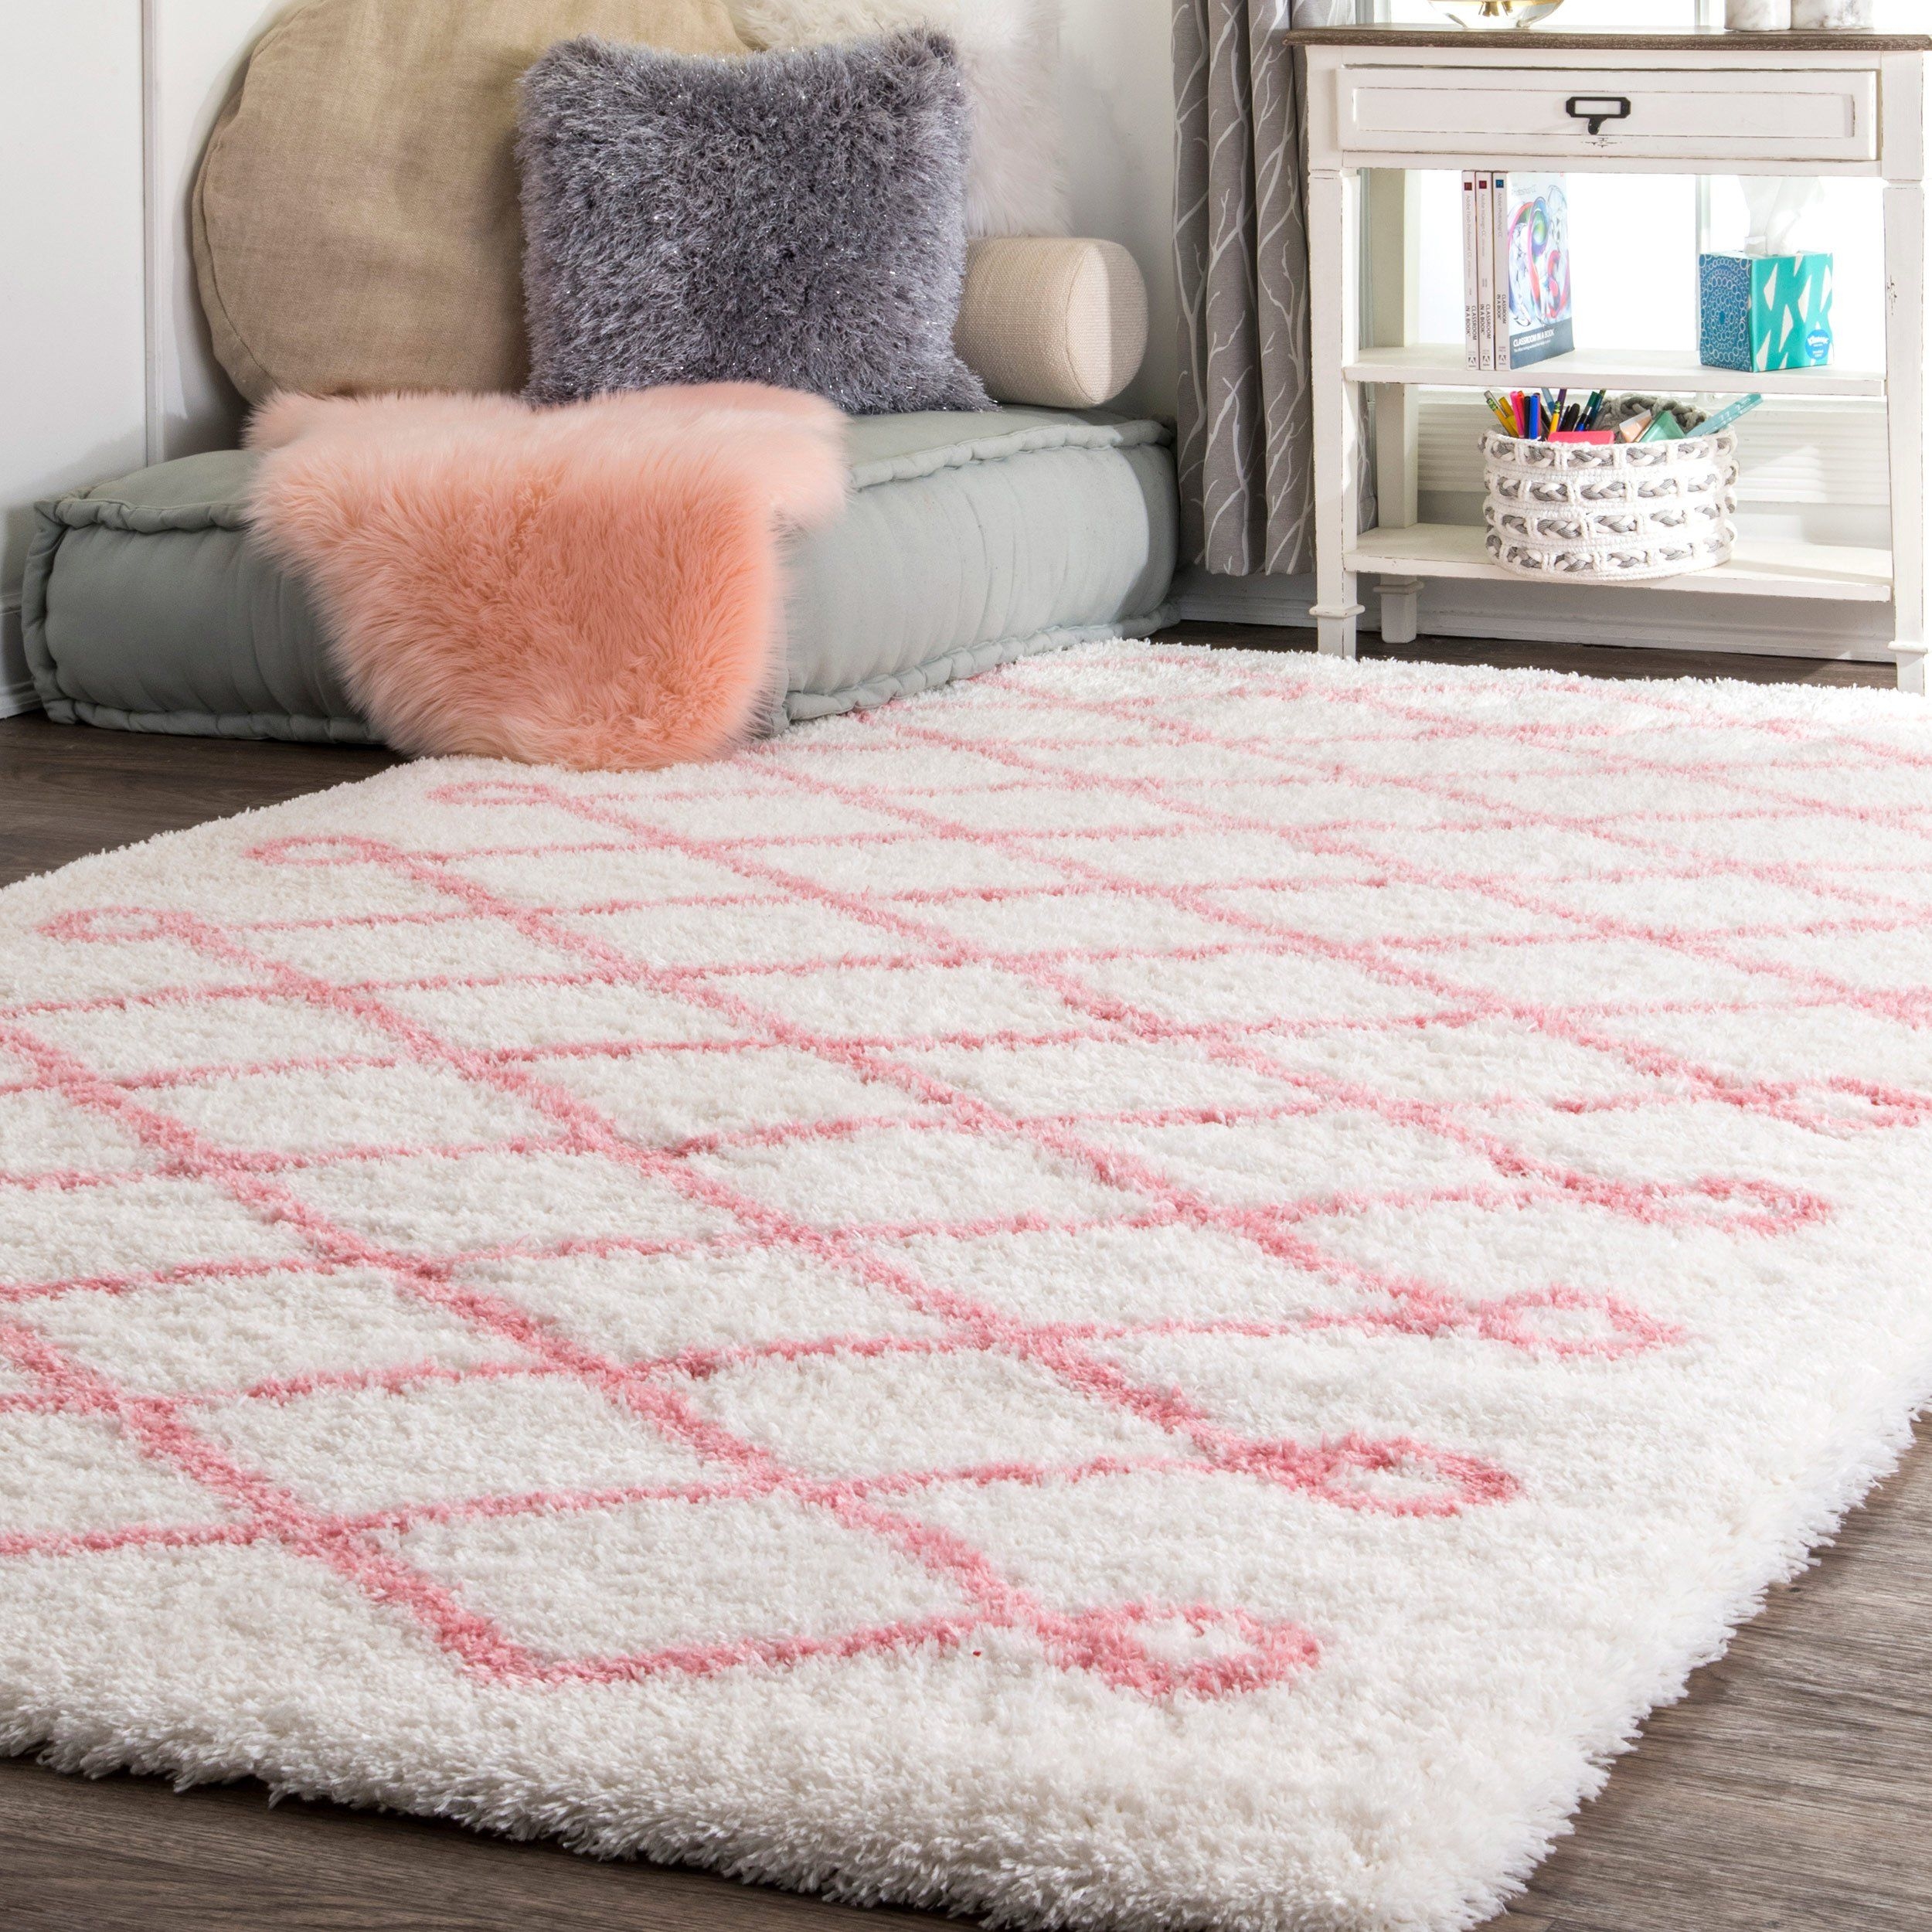 Blush Pink 24x24 Sumptuous Fluffy Star Shaped Shaggy Kids Nursery Rug in Blush Pink and Grey 70 x 70 cm 